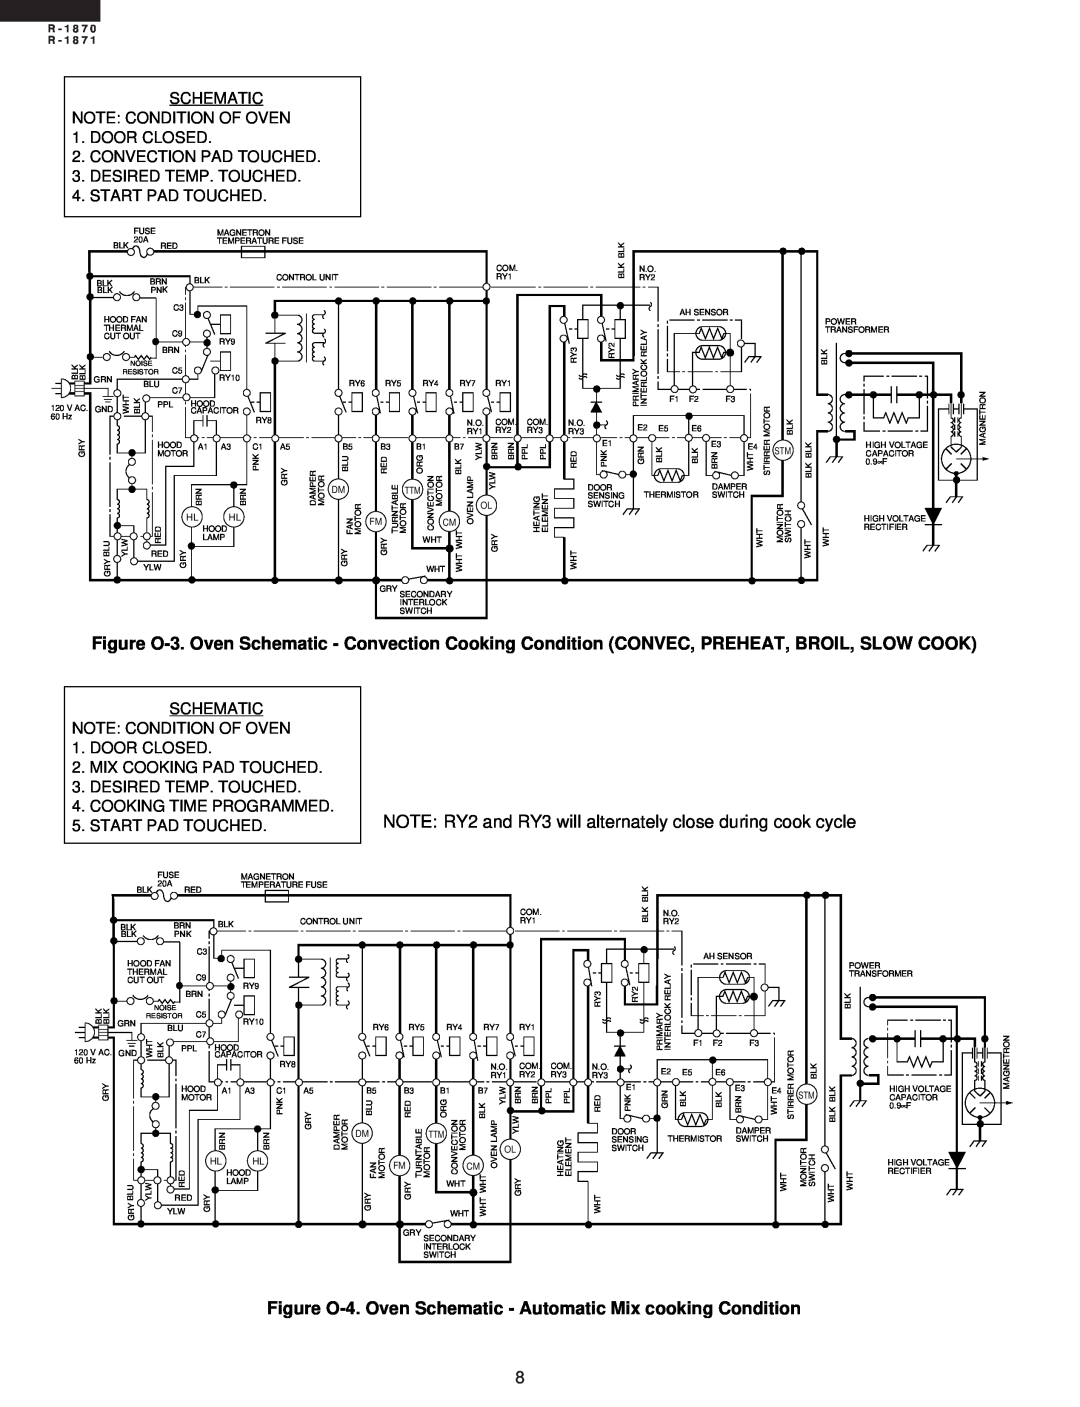 Sharp R-1870 service manual NOTE RY2 and RY3 will alternately close during cook cycle, R - 1 8 7 R - 1 8 7 